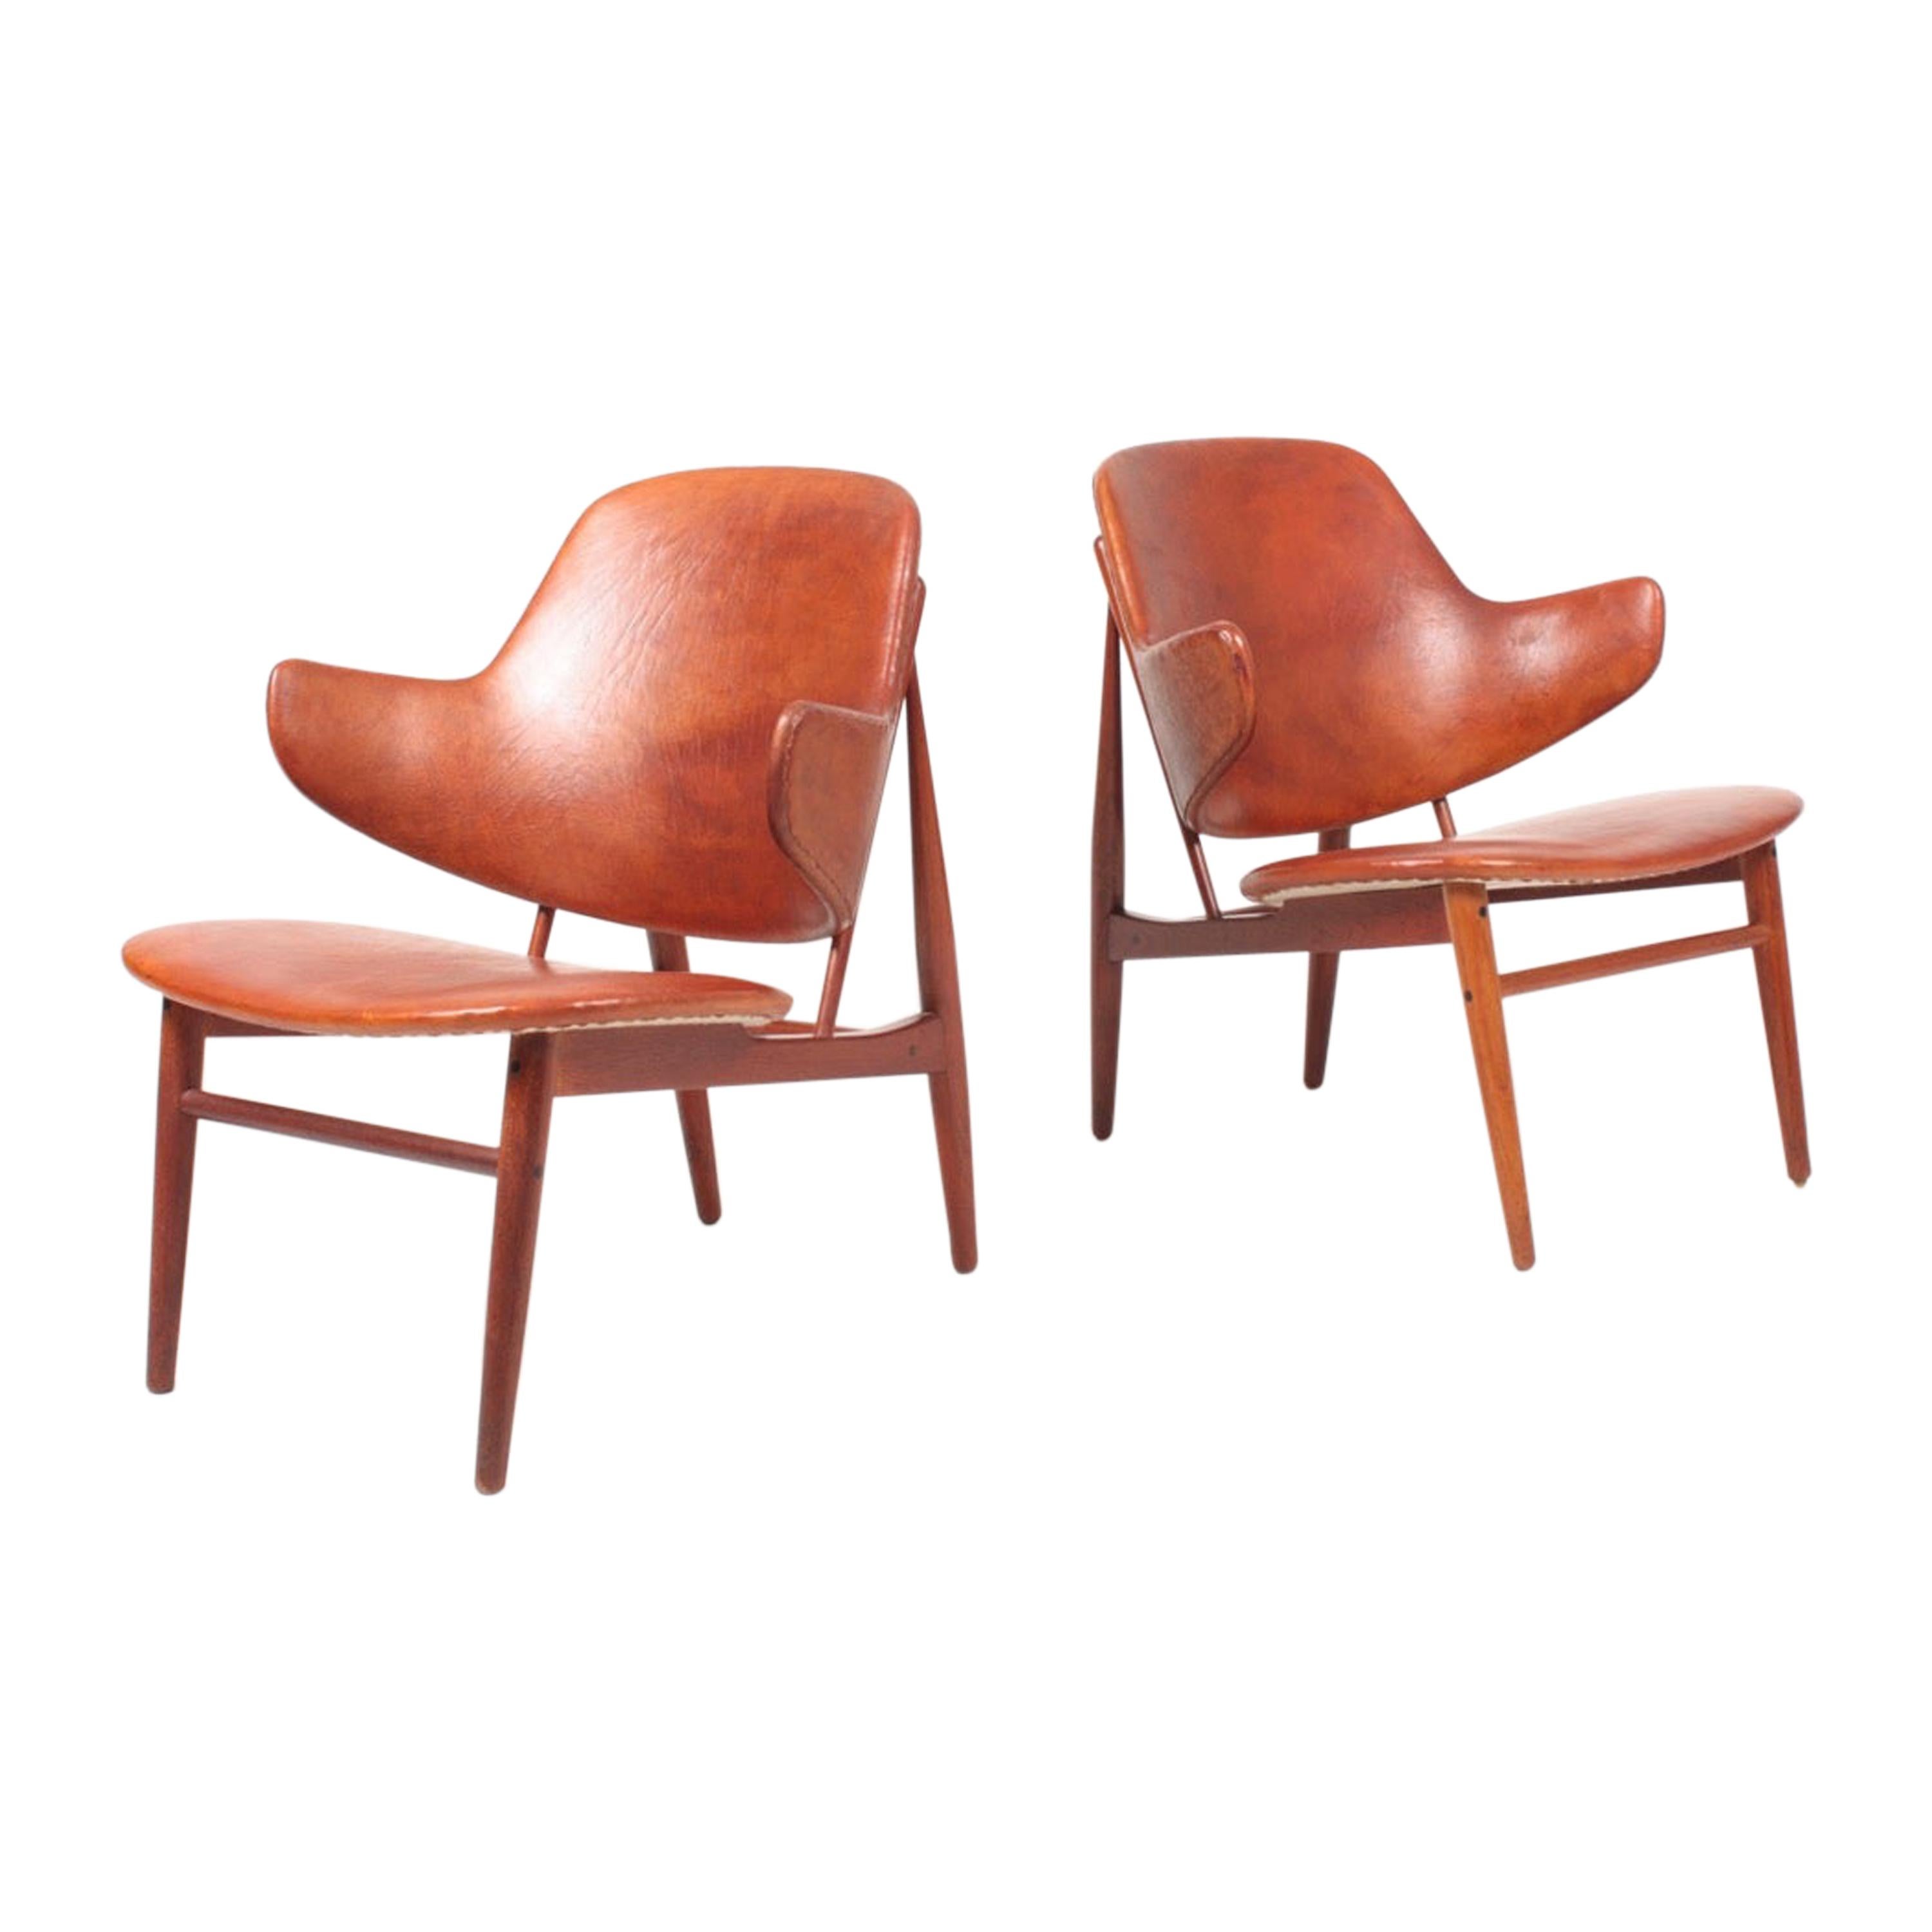 Pair of Lounge Chairs in Patinated Leather by Ib Kofod Larsen, 1950s